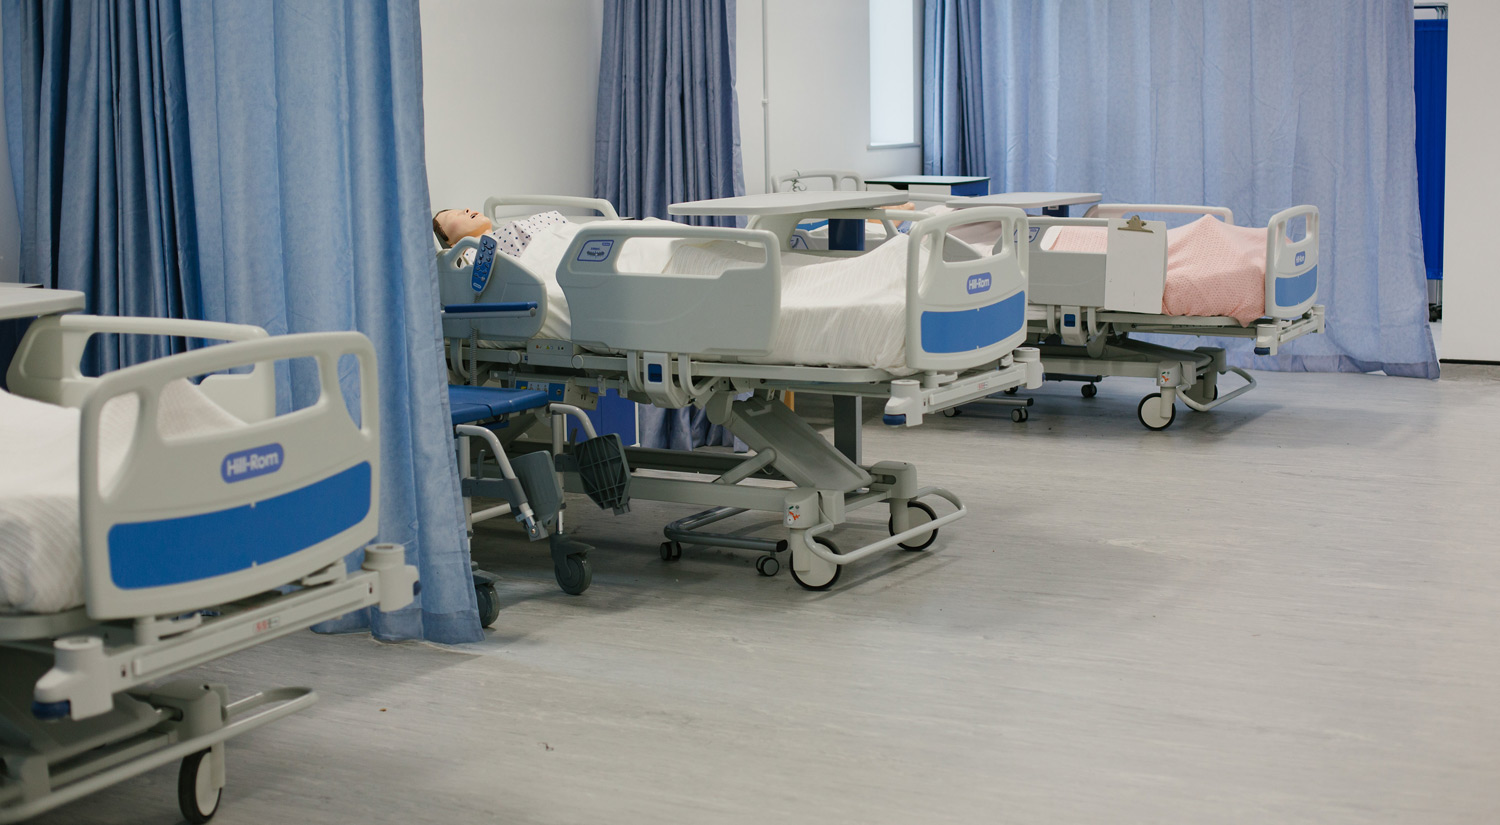 Our new hospital ward where healthcare students can practice treating patients